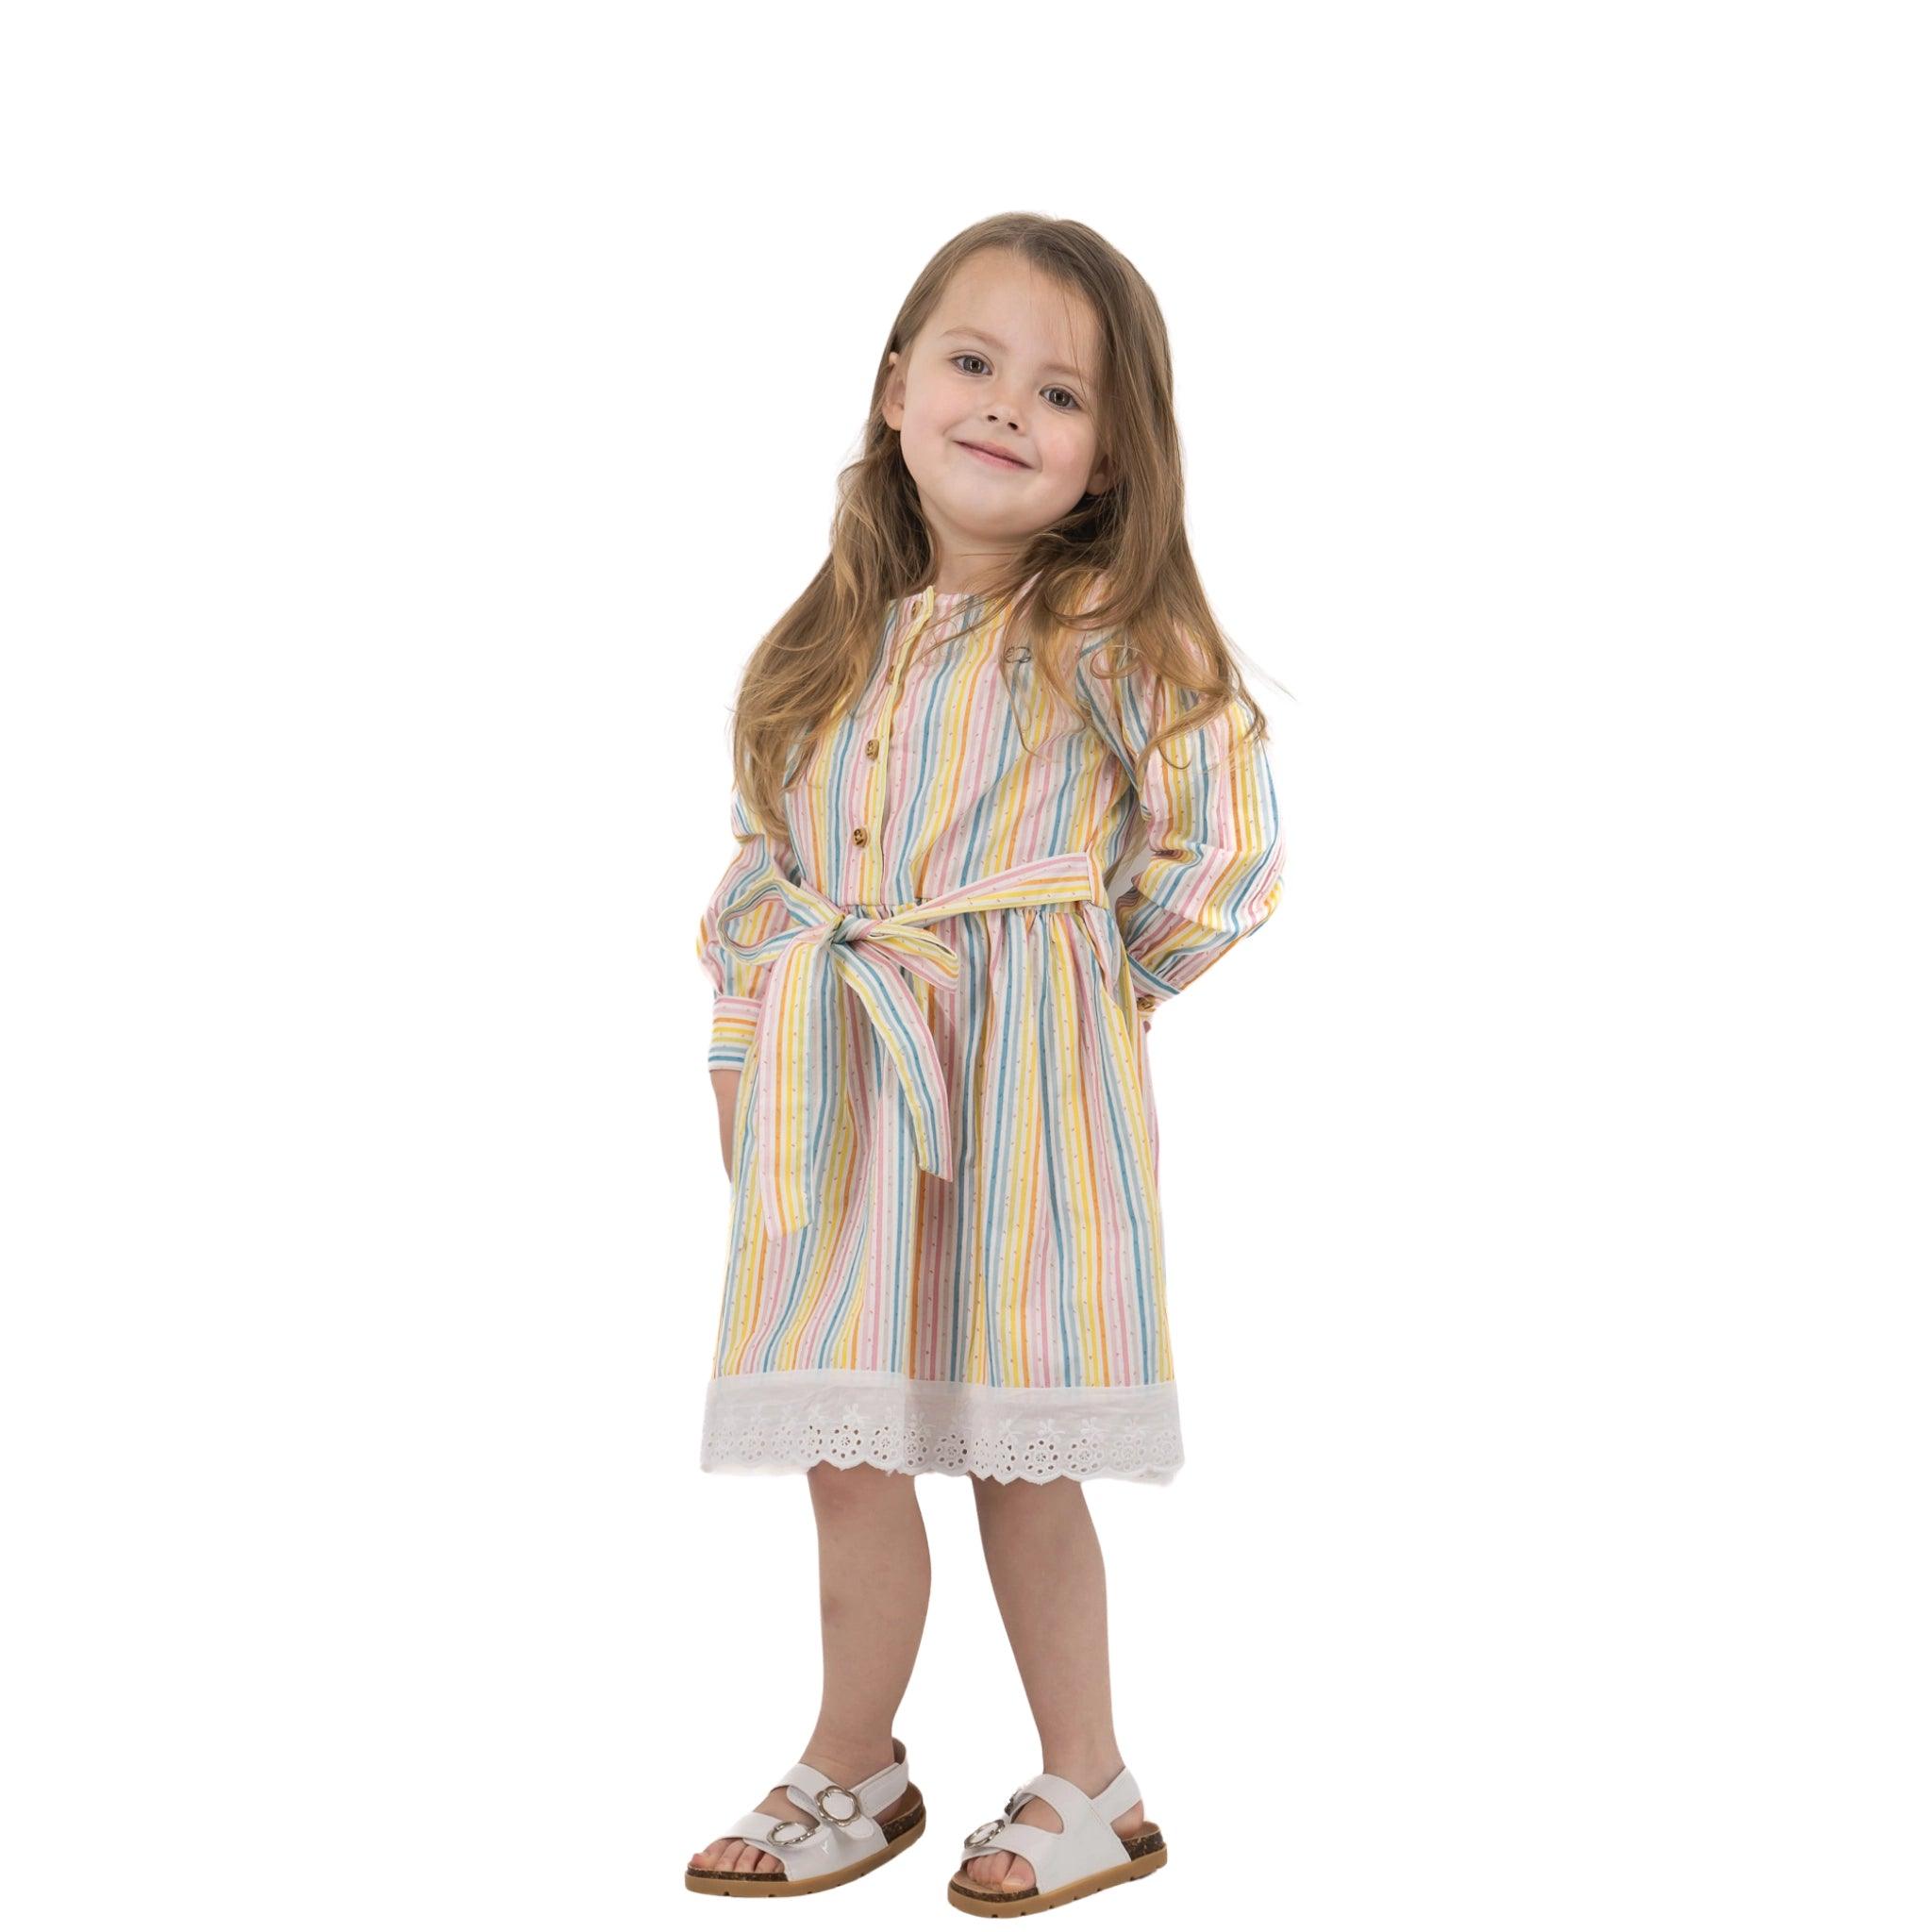 A young girl in a Karee striped pastel Long Puff Sleeve White Cotton Dress with Stripes and white sandals smiling and posing against a white background.